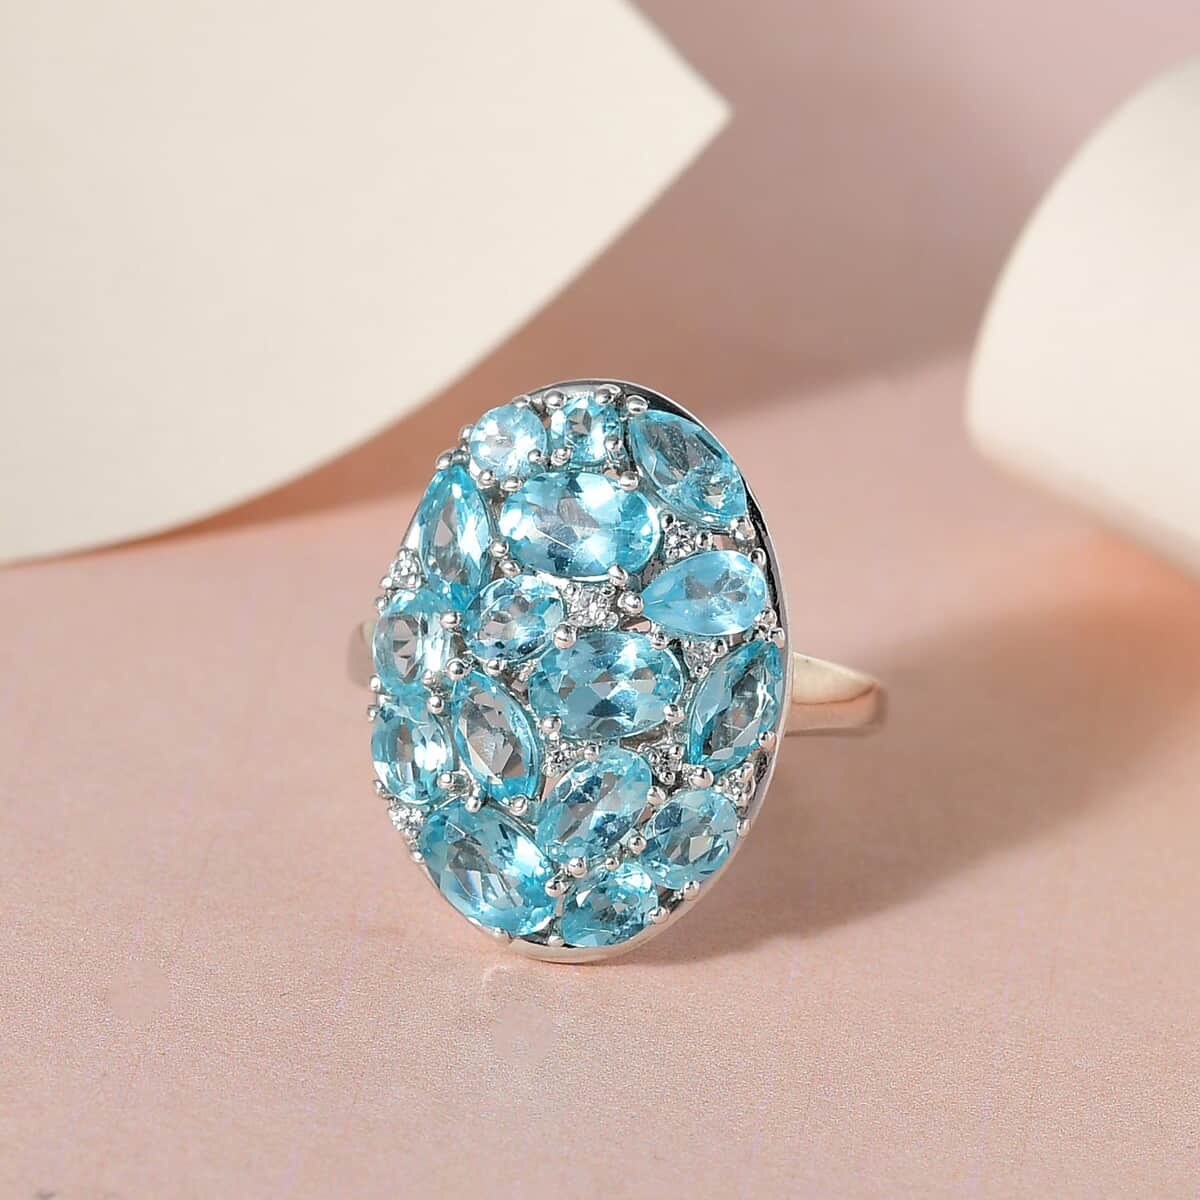 Madagascar Paraiba Apatite and Natural White Zircon Elongated Ring in Platinum Over Sterling Silver 4.25 ctw (Delivery in 3-5 Business Days) image number 1